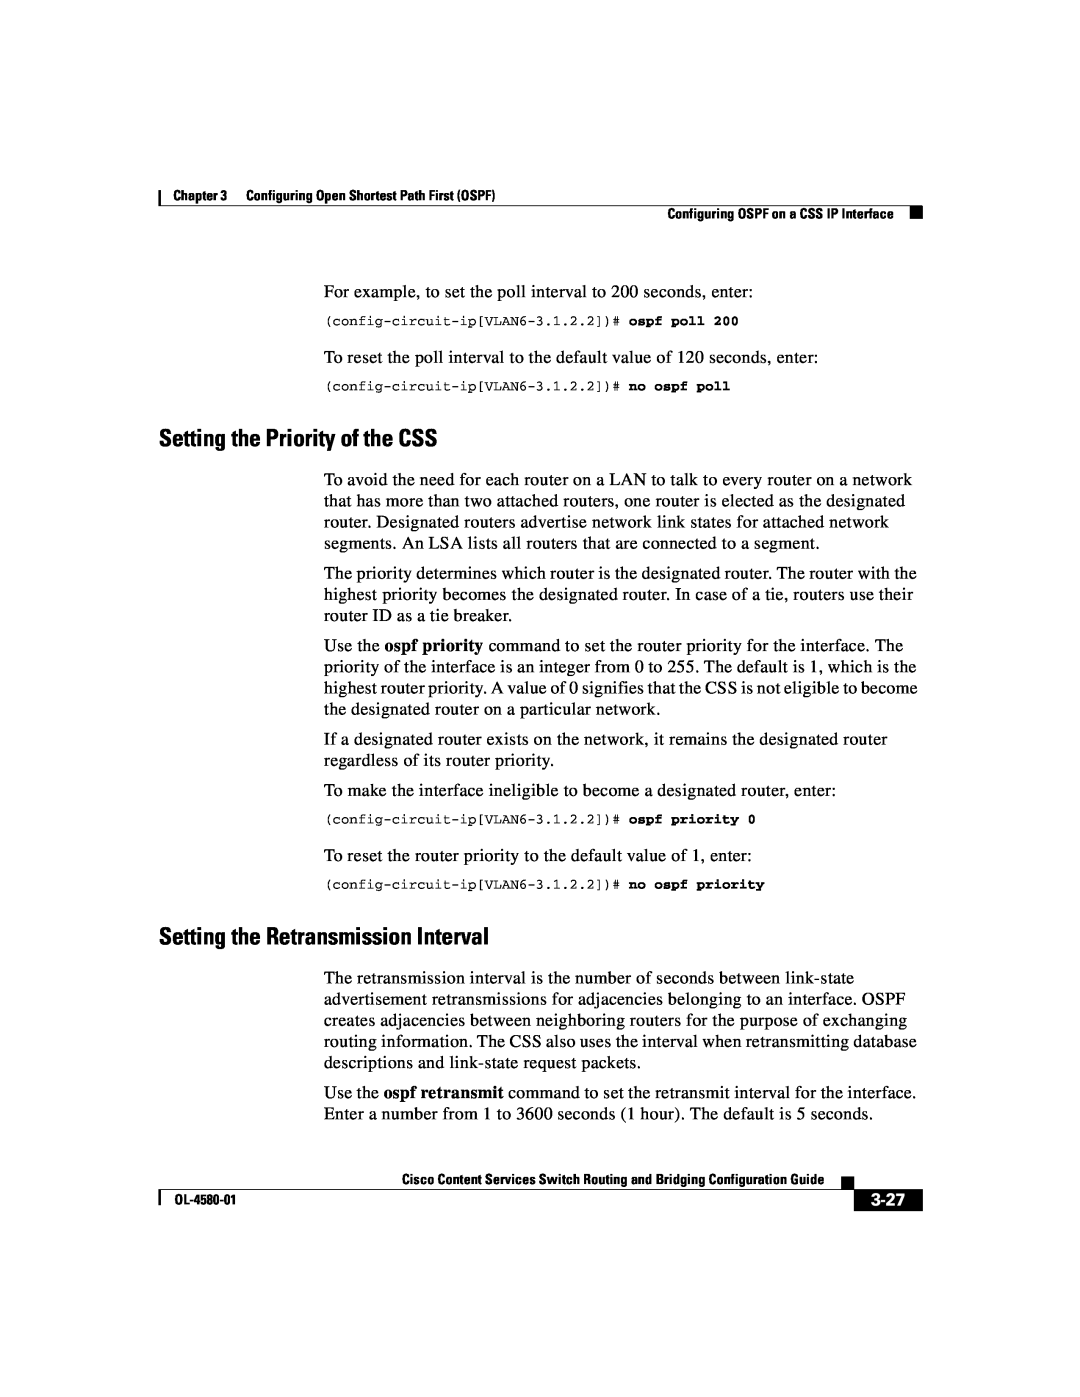 Cisco Systems OL-4580-01 manual Setting the Priority of the CSS, Setting the Retransmission Interval, 3-27 